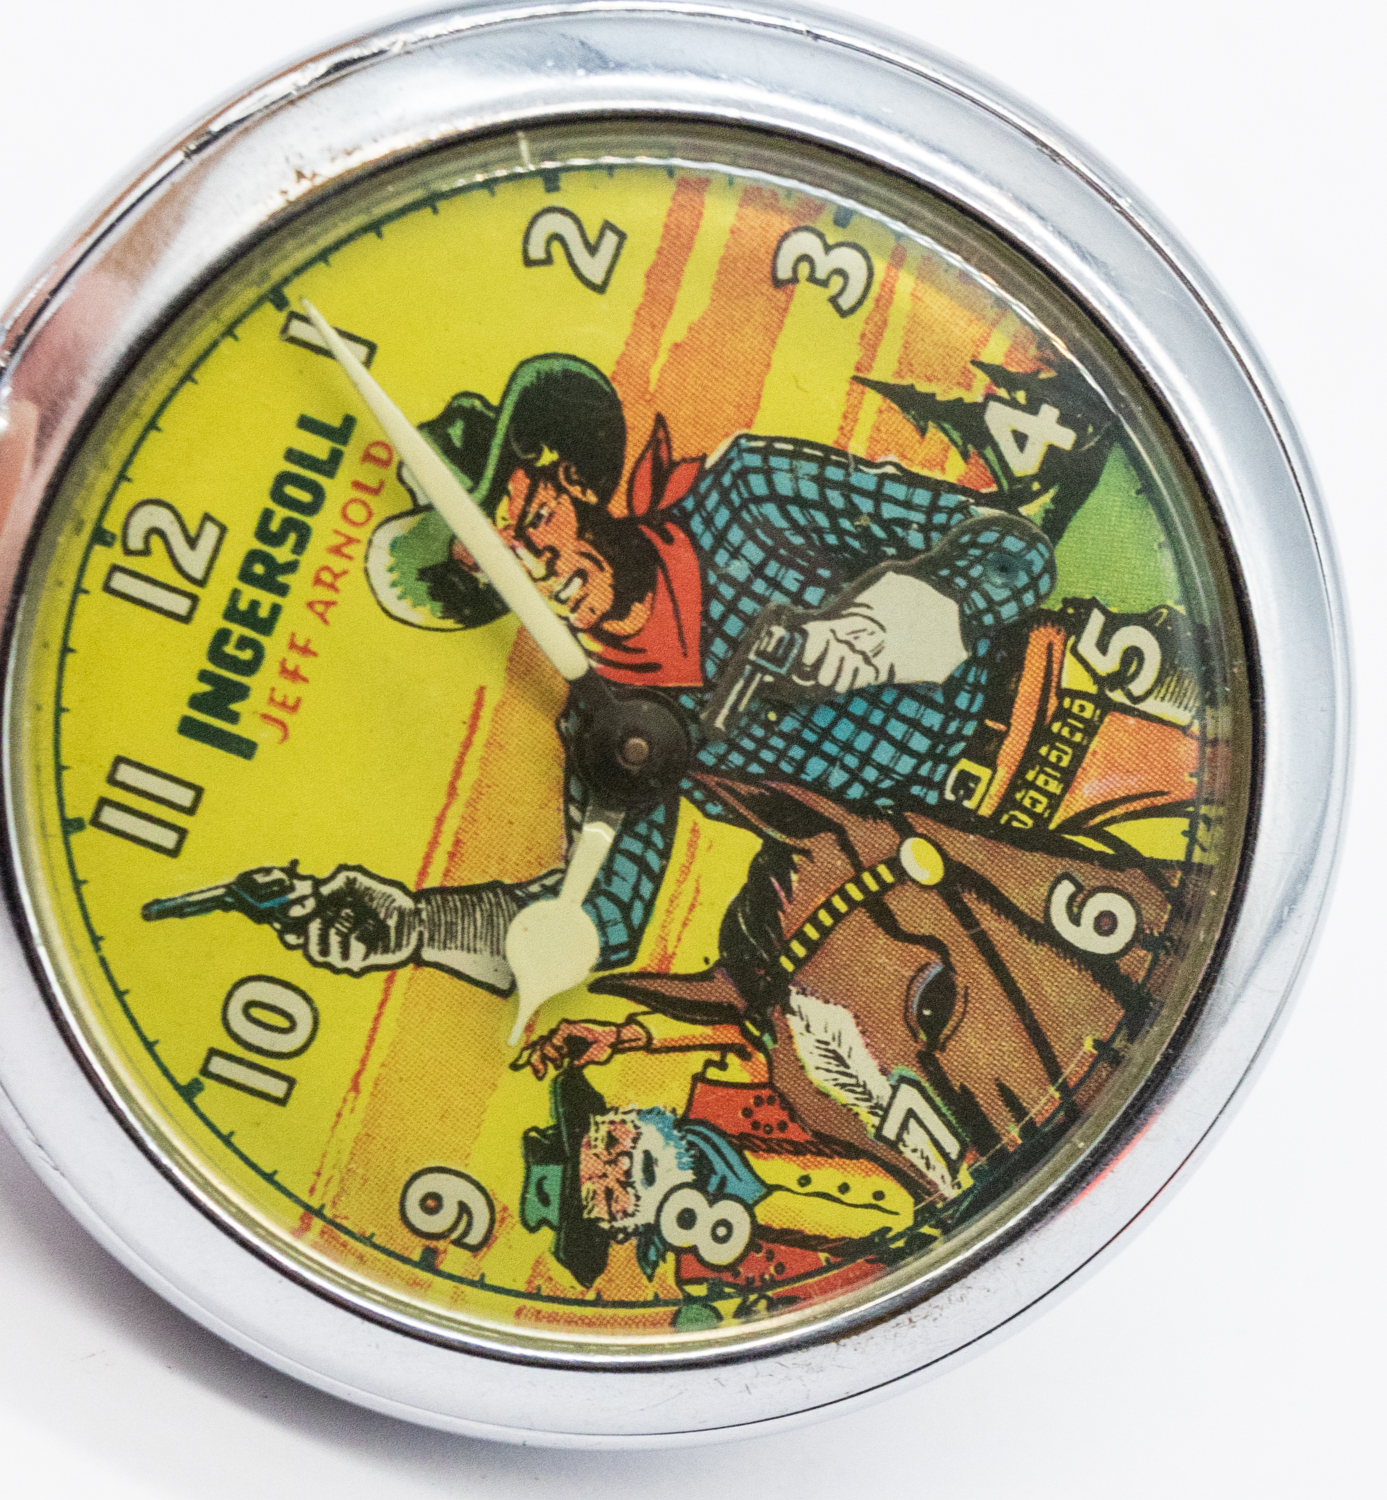 Ingersoll a  'Geoff Arnold' automation cowboy chrome cased pocket watch, circa 1950's, case approx - Image 2 of 2